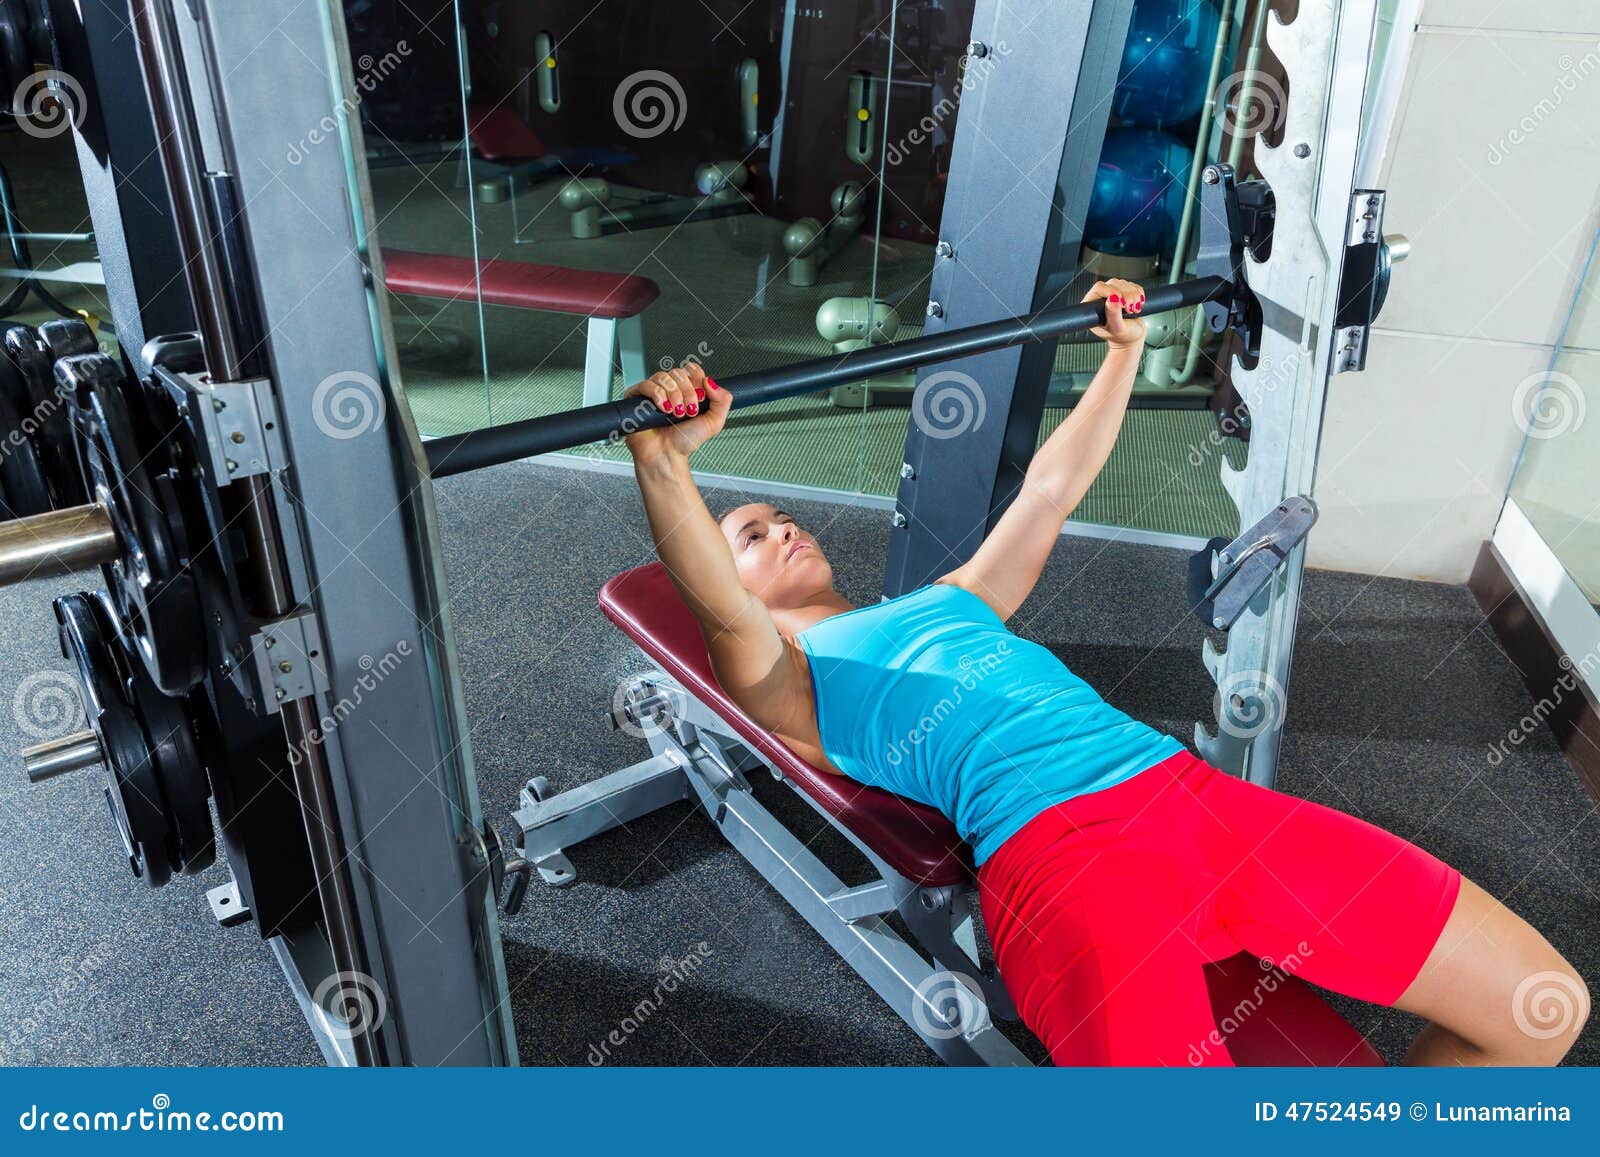 Bench Press Girl Flat Multipower Smith Machine Stock Image - Image of  barbell, muscular: 47524549